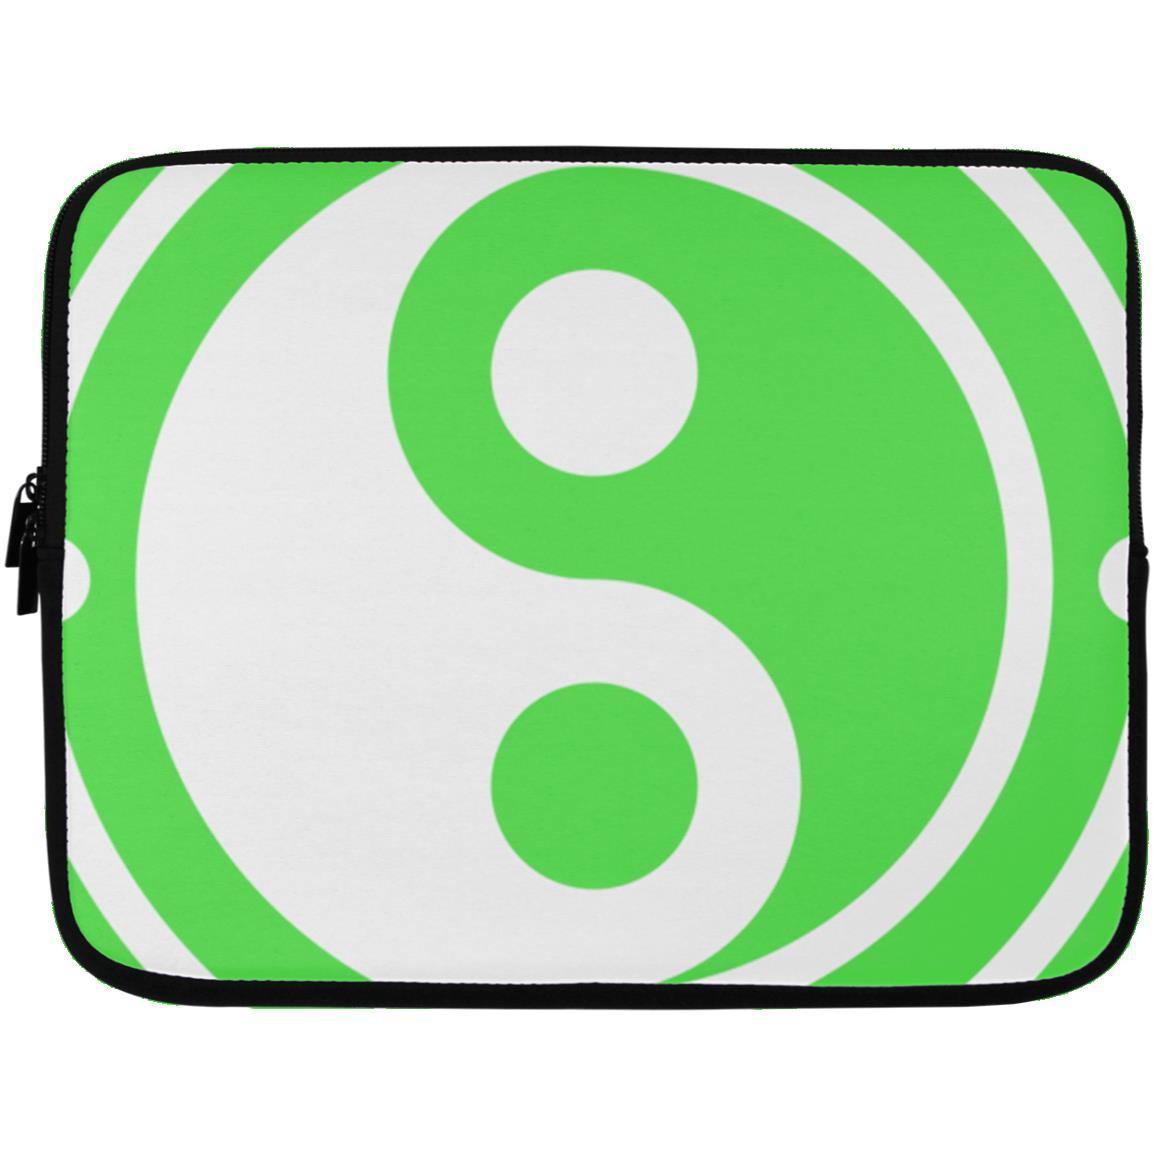 Crop Circle Laptop Sleeve - Cley Hill 4 - Shapes of Wisdom